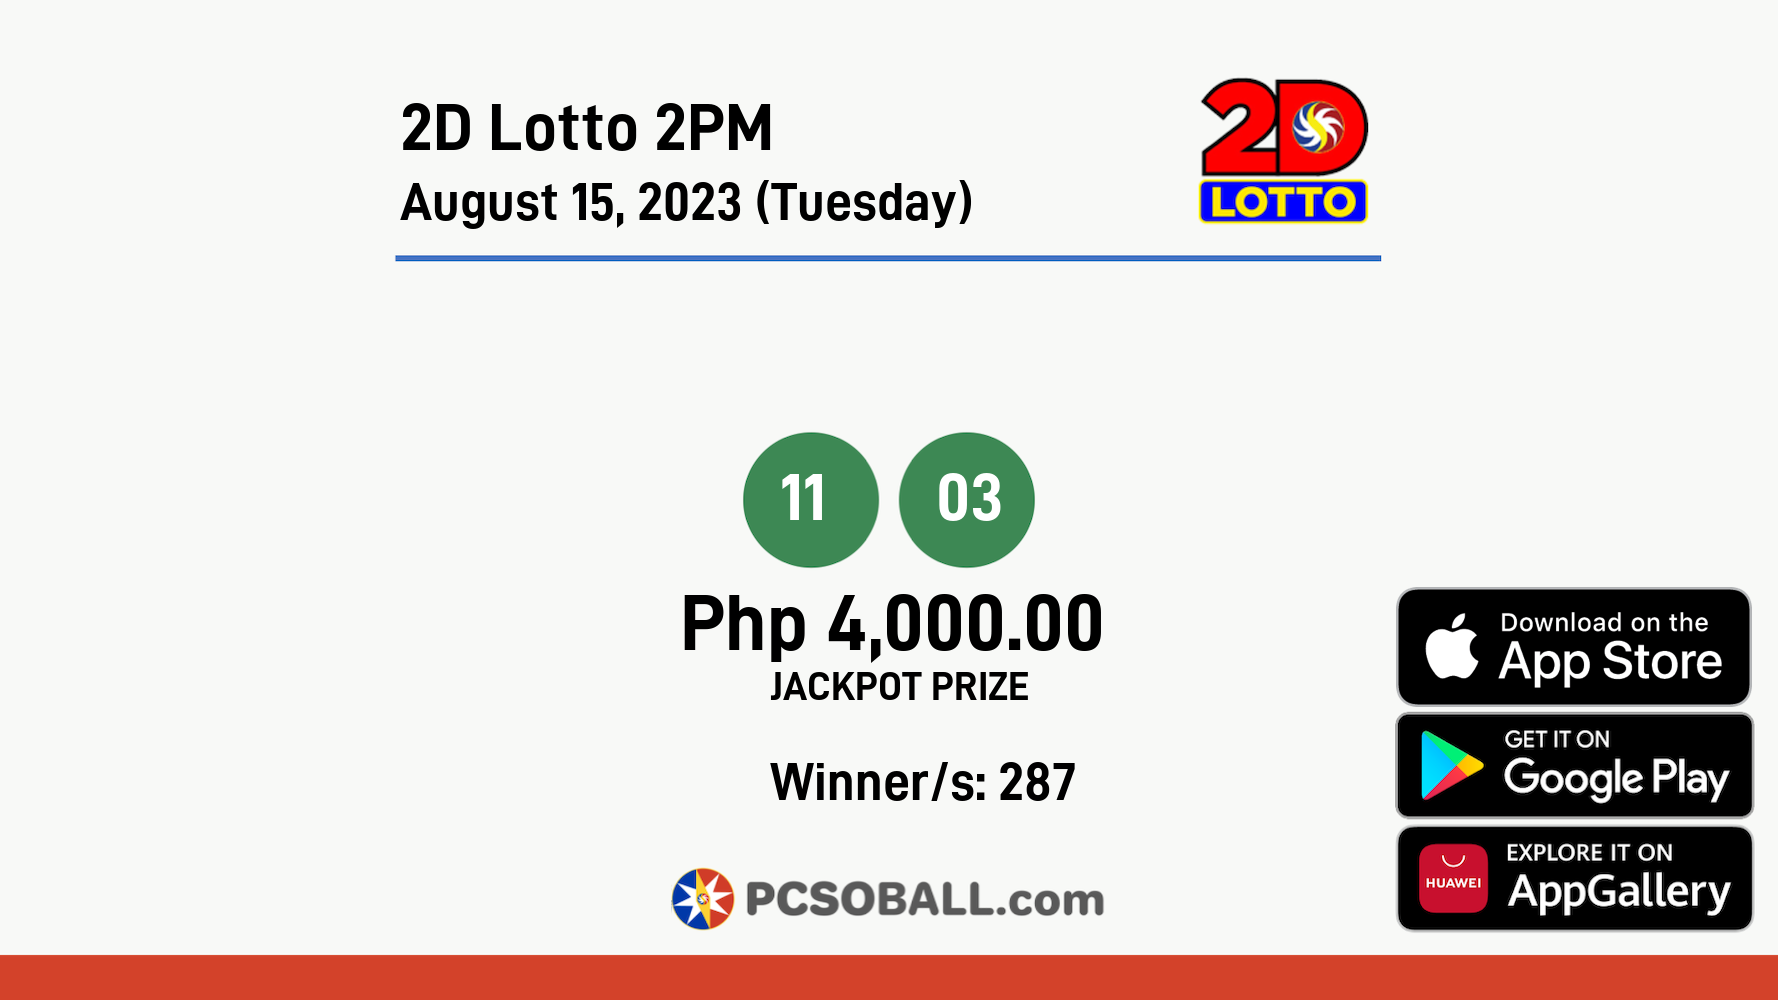 2D Lotto 2PM August 15, 2023 (Tuesday) Result